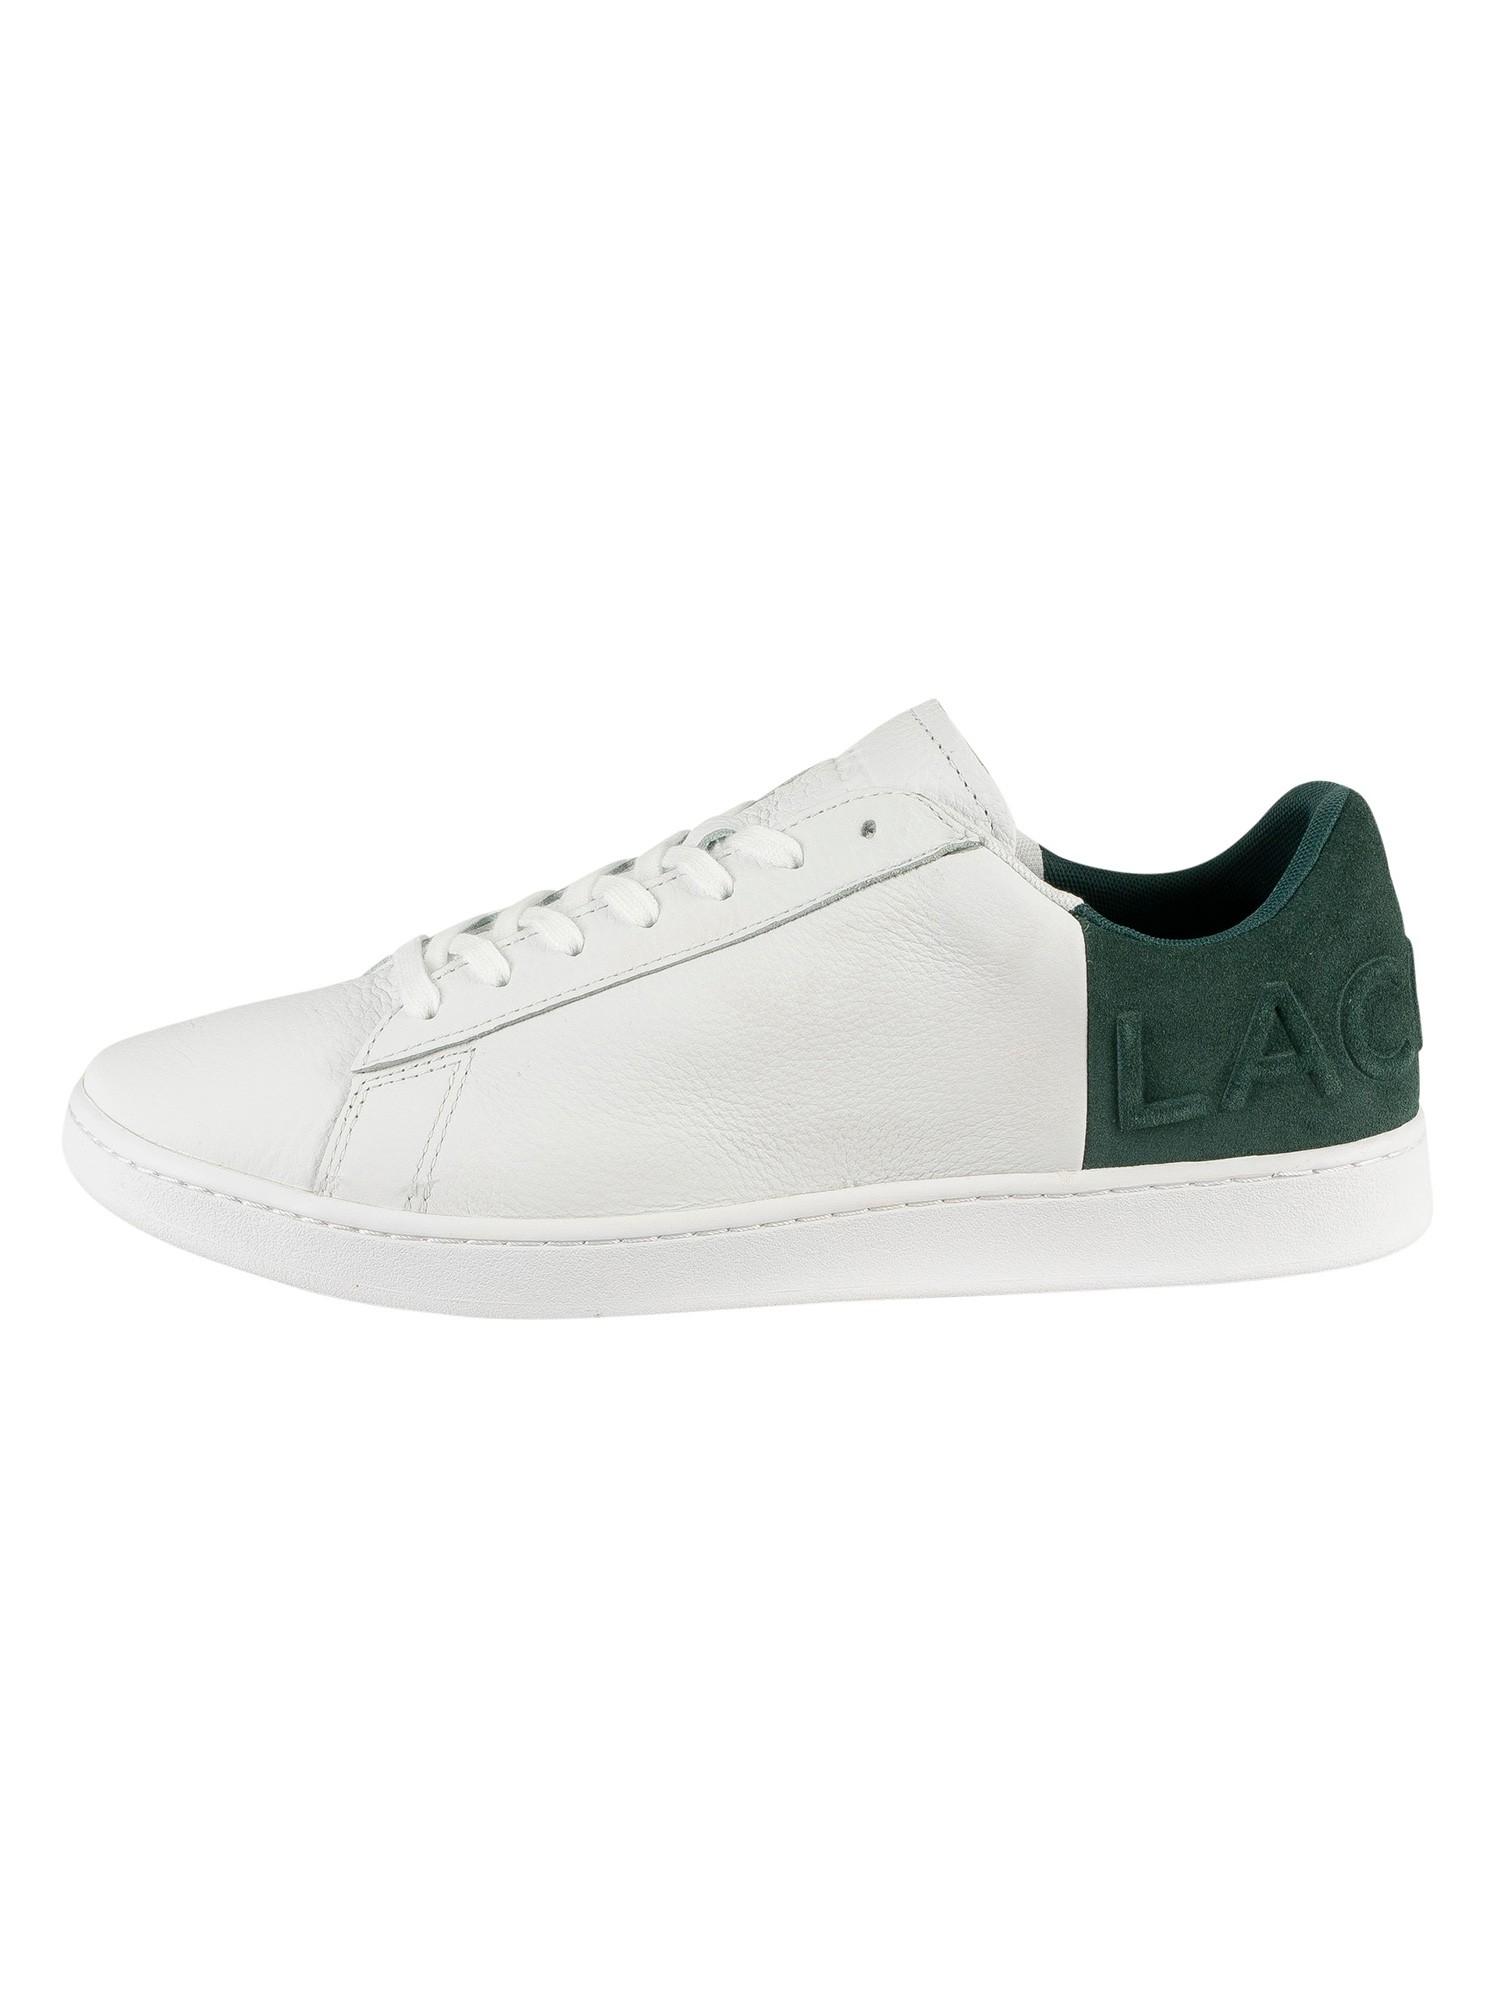 Lacoste Carnaby Evo 419 2 Sma Leather Trainers in White for Men | Lyst